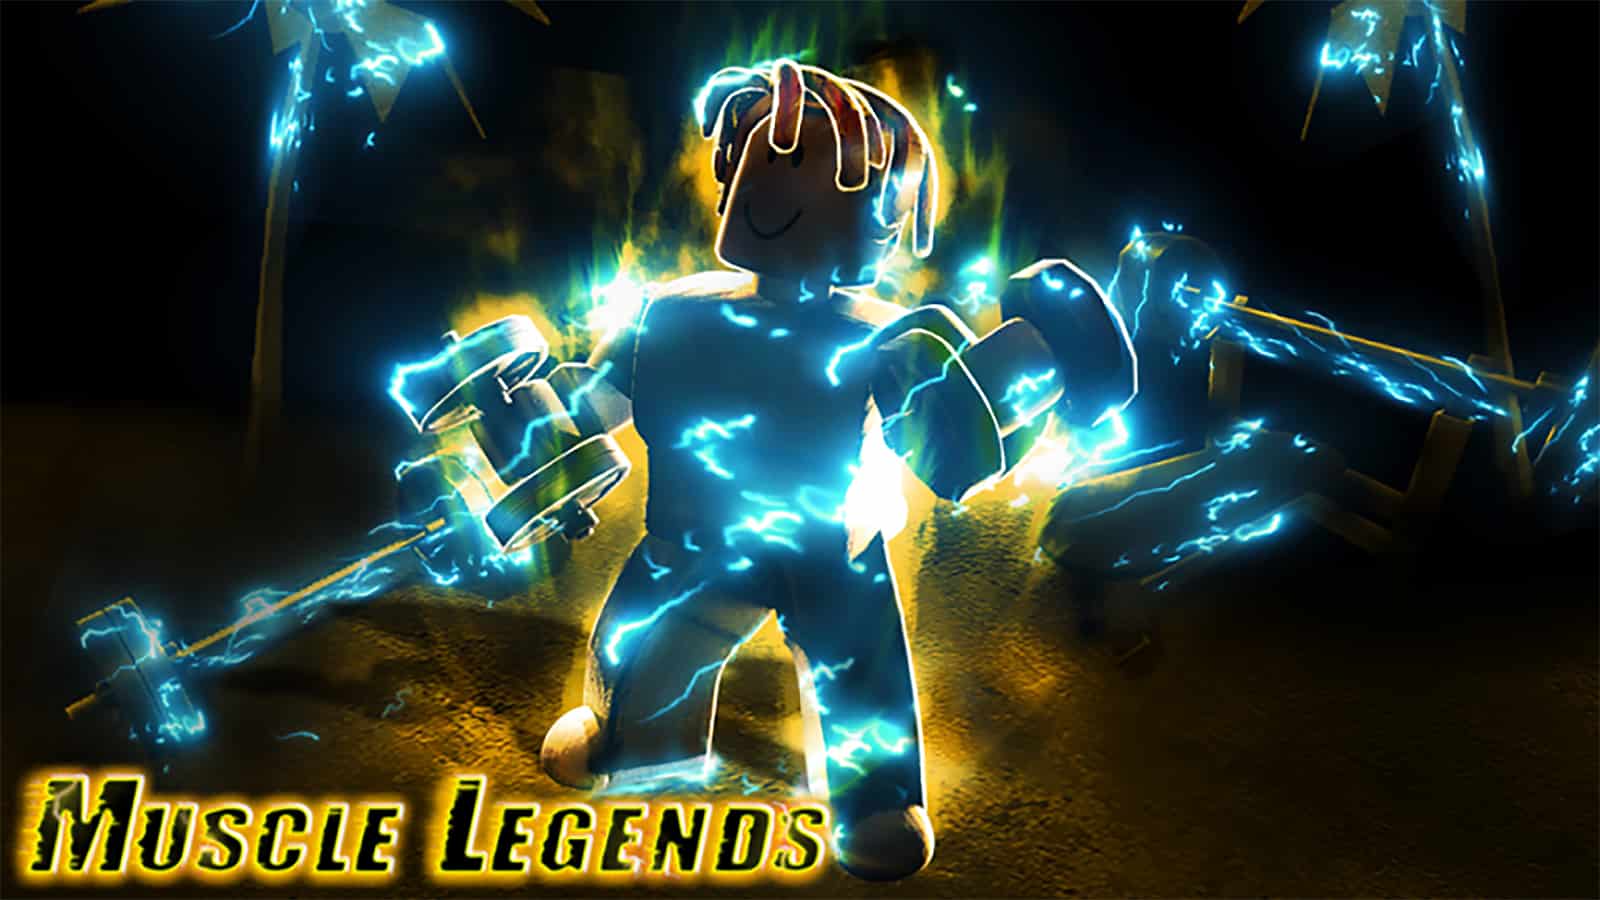 LATEST* Roblox Legends of Speed Codes List (January 2023)